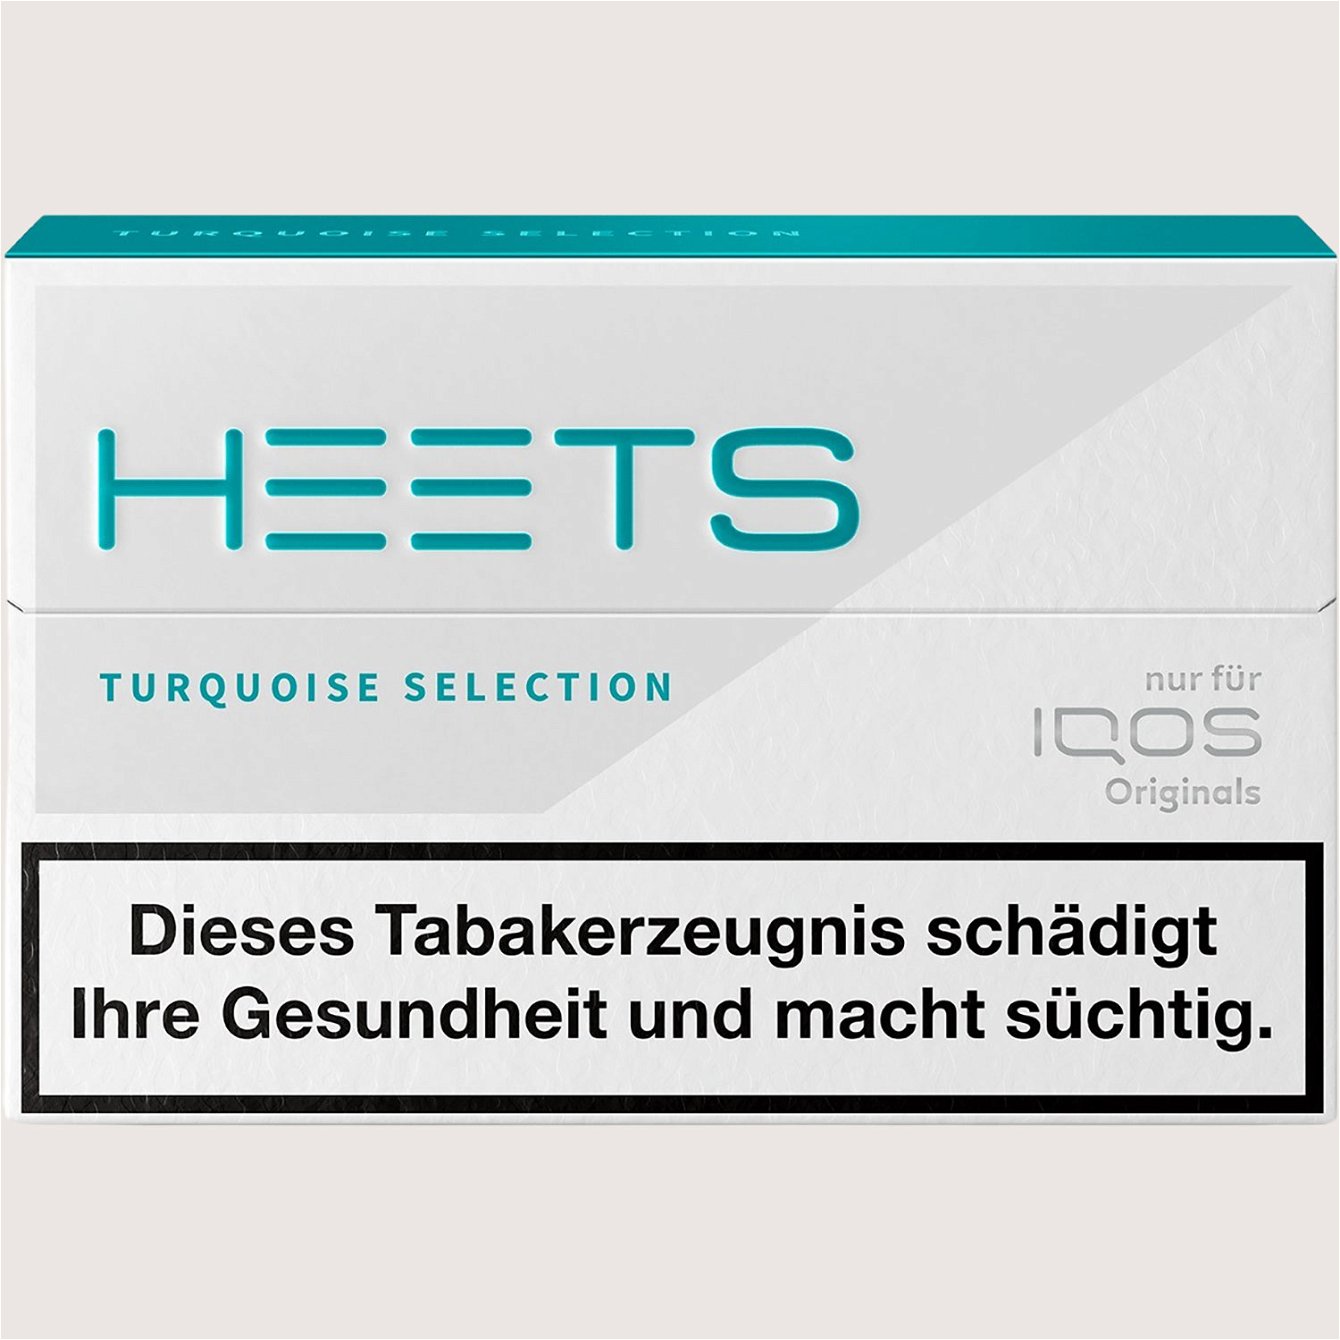 IQOS HEETS Turquoise Selection